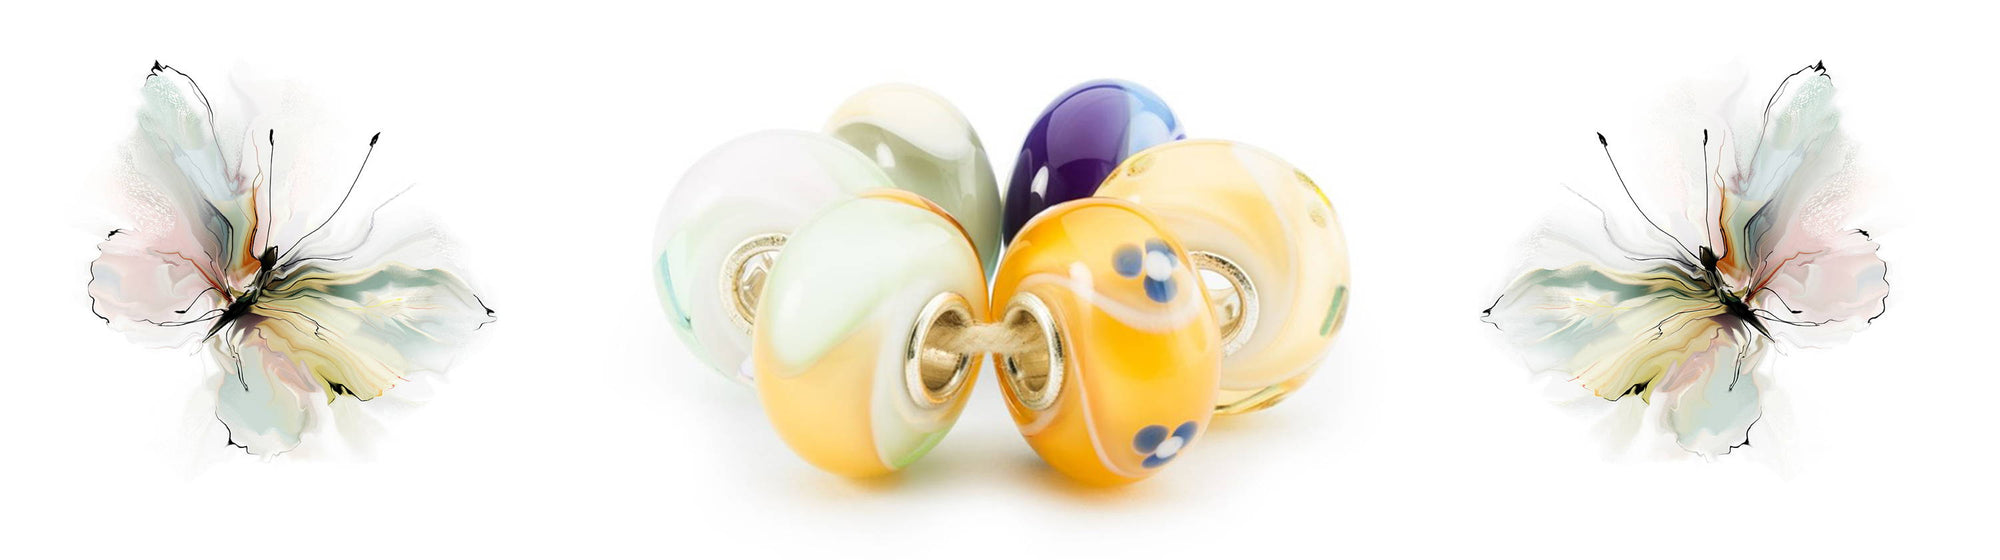 Trollbeads Armadillo Collection Preview